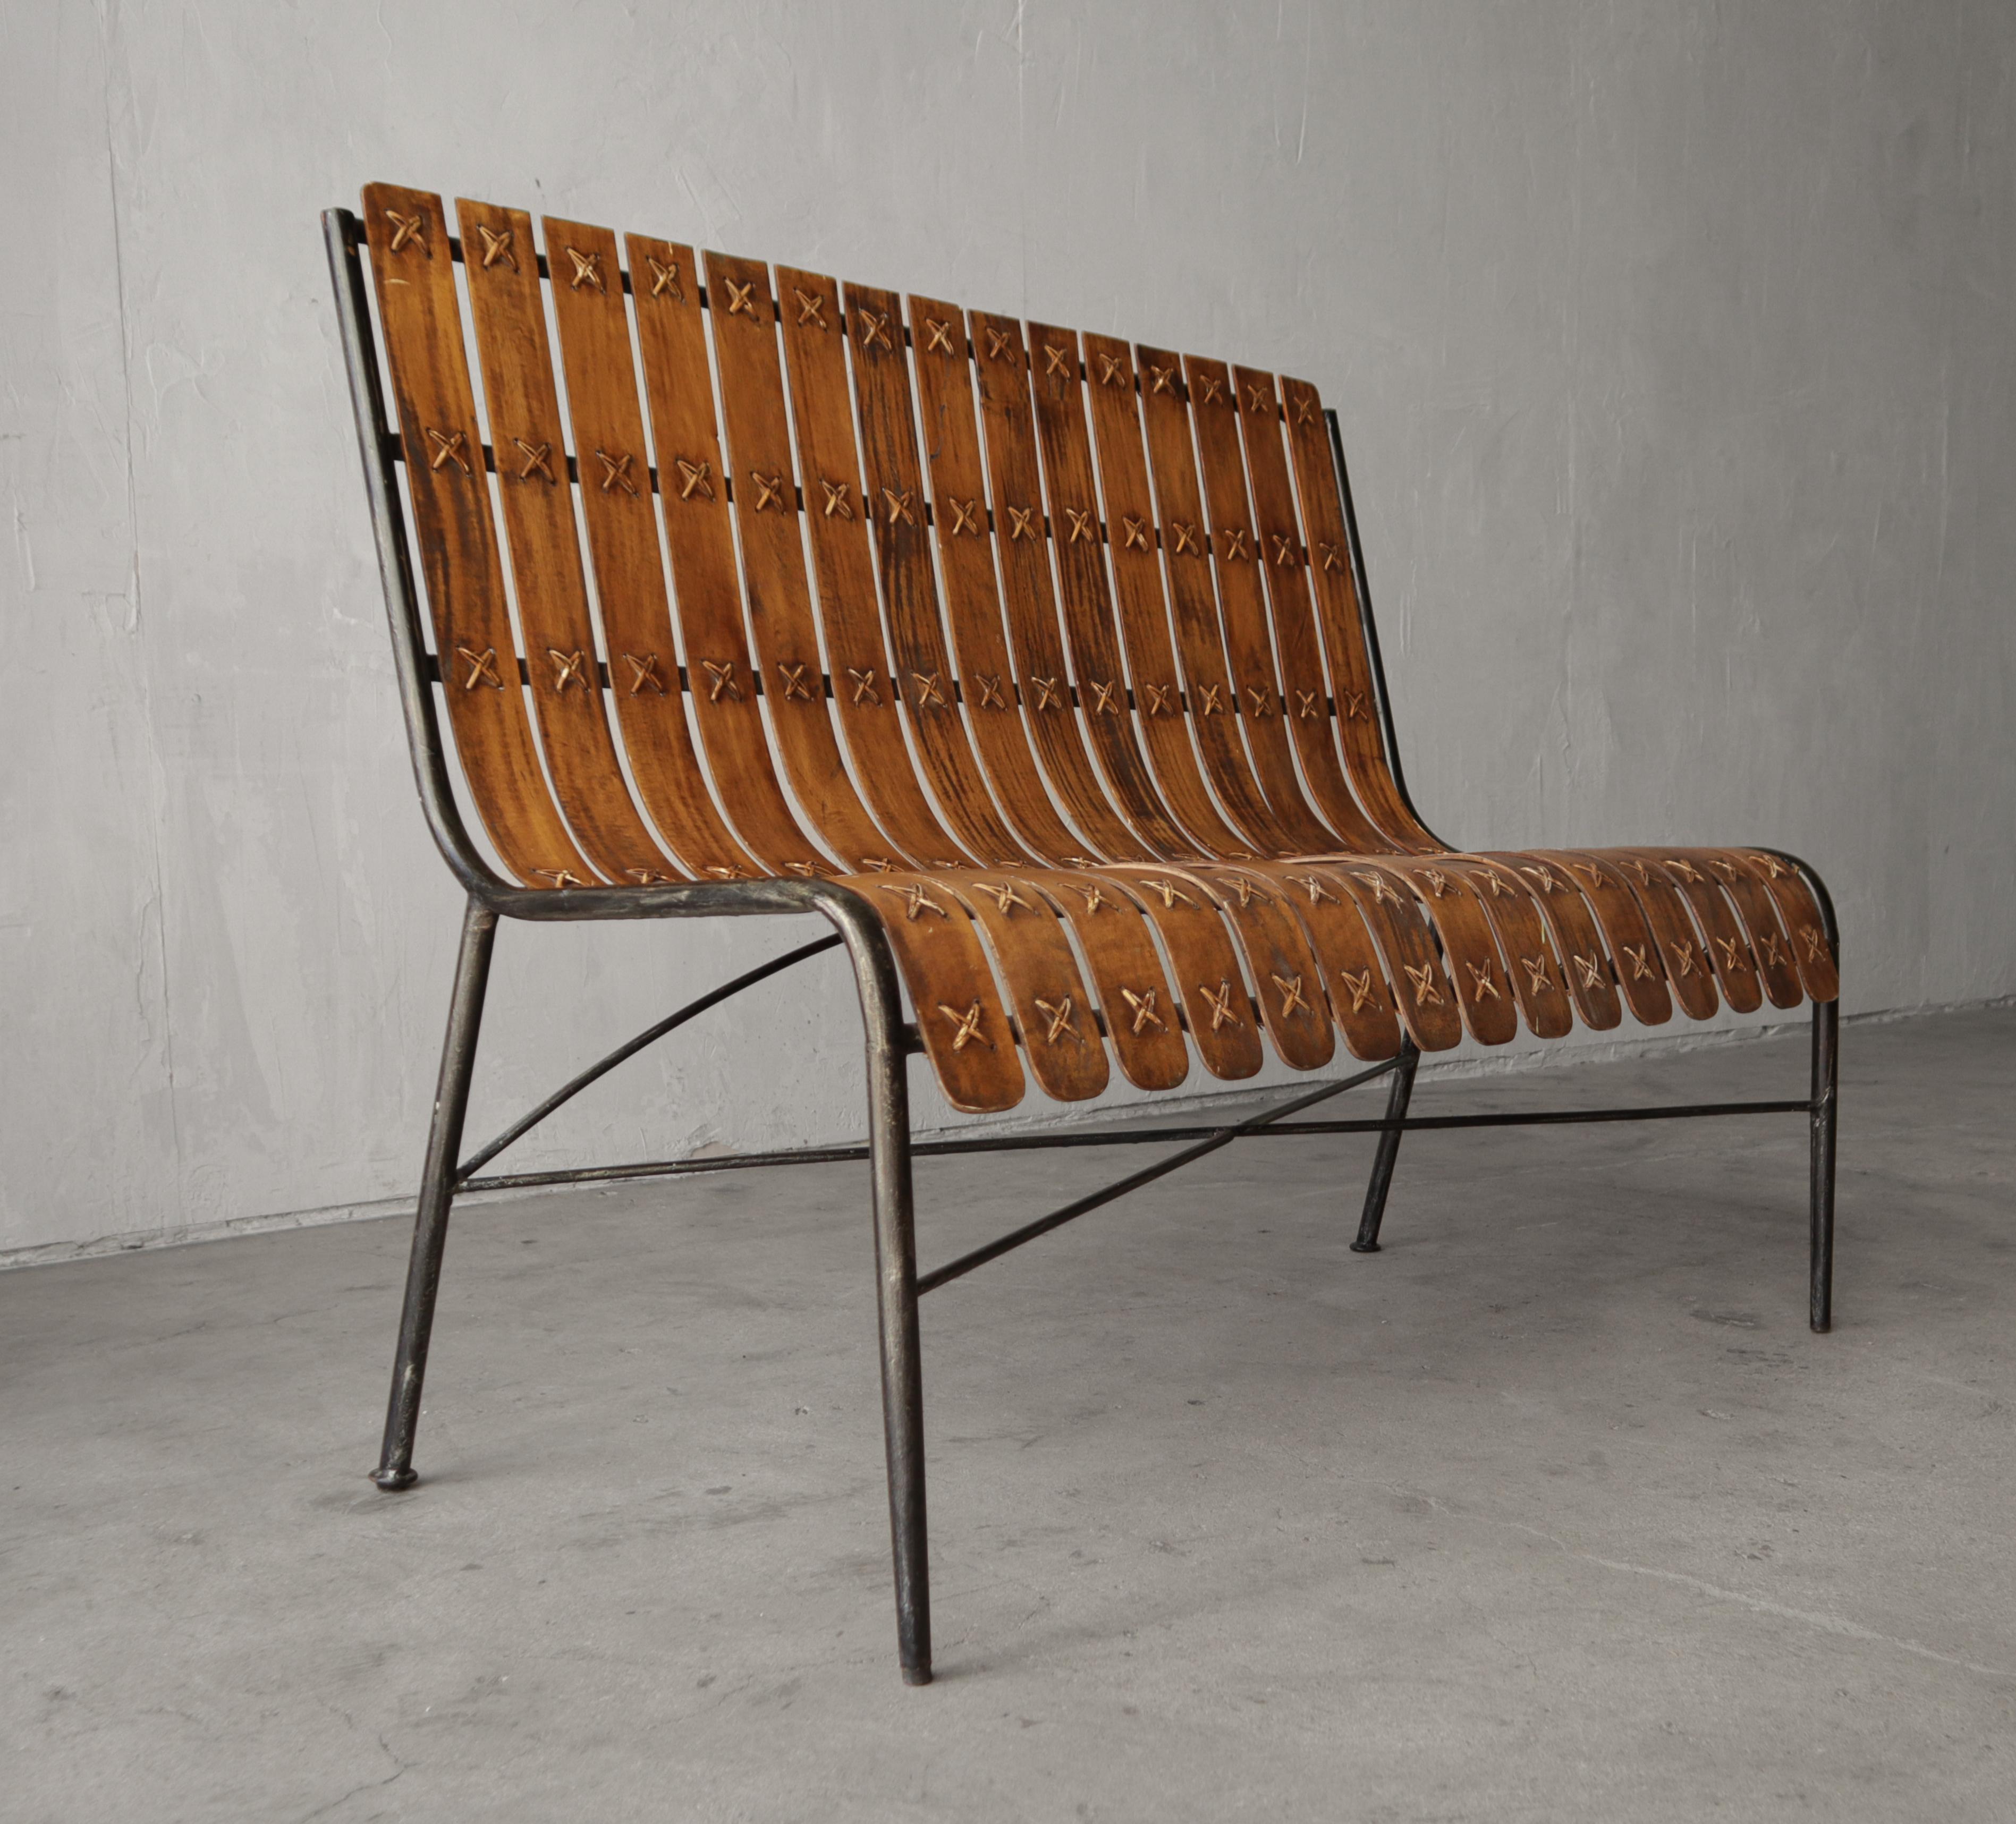 Love this unique Mid Century bentwood slat bench.  The curve of the seat and the rattan X details are everything.  A truly unique piece.  Can only find one other example, a lounge chair.  Love it's unique style and rarity.

Bench is in overall great